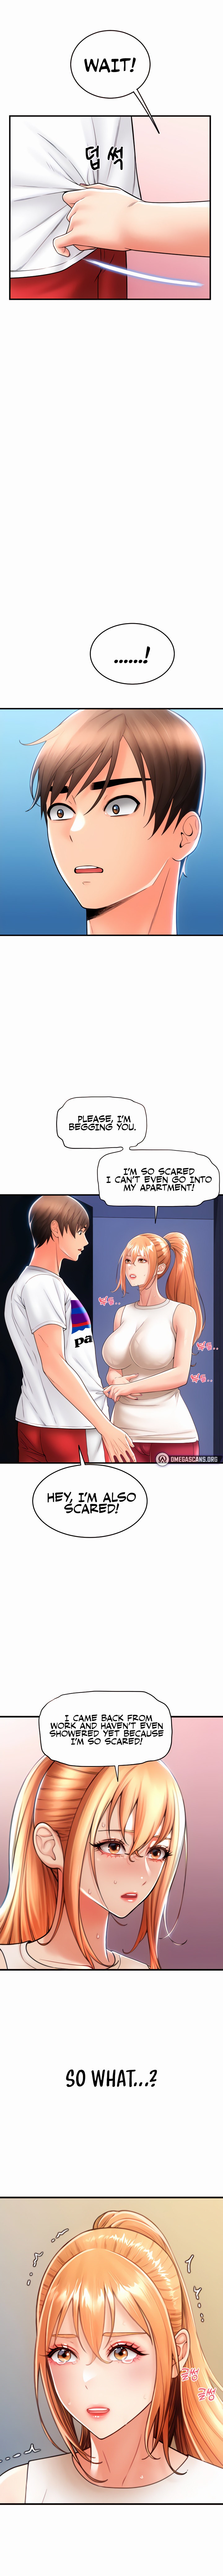 Pay with Sperm Pay - Chapter 24 Page 8